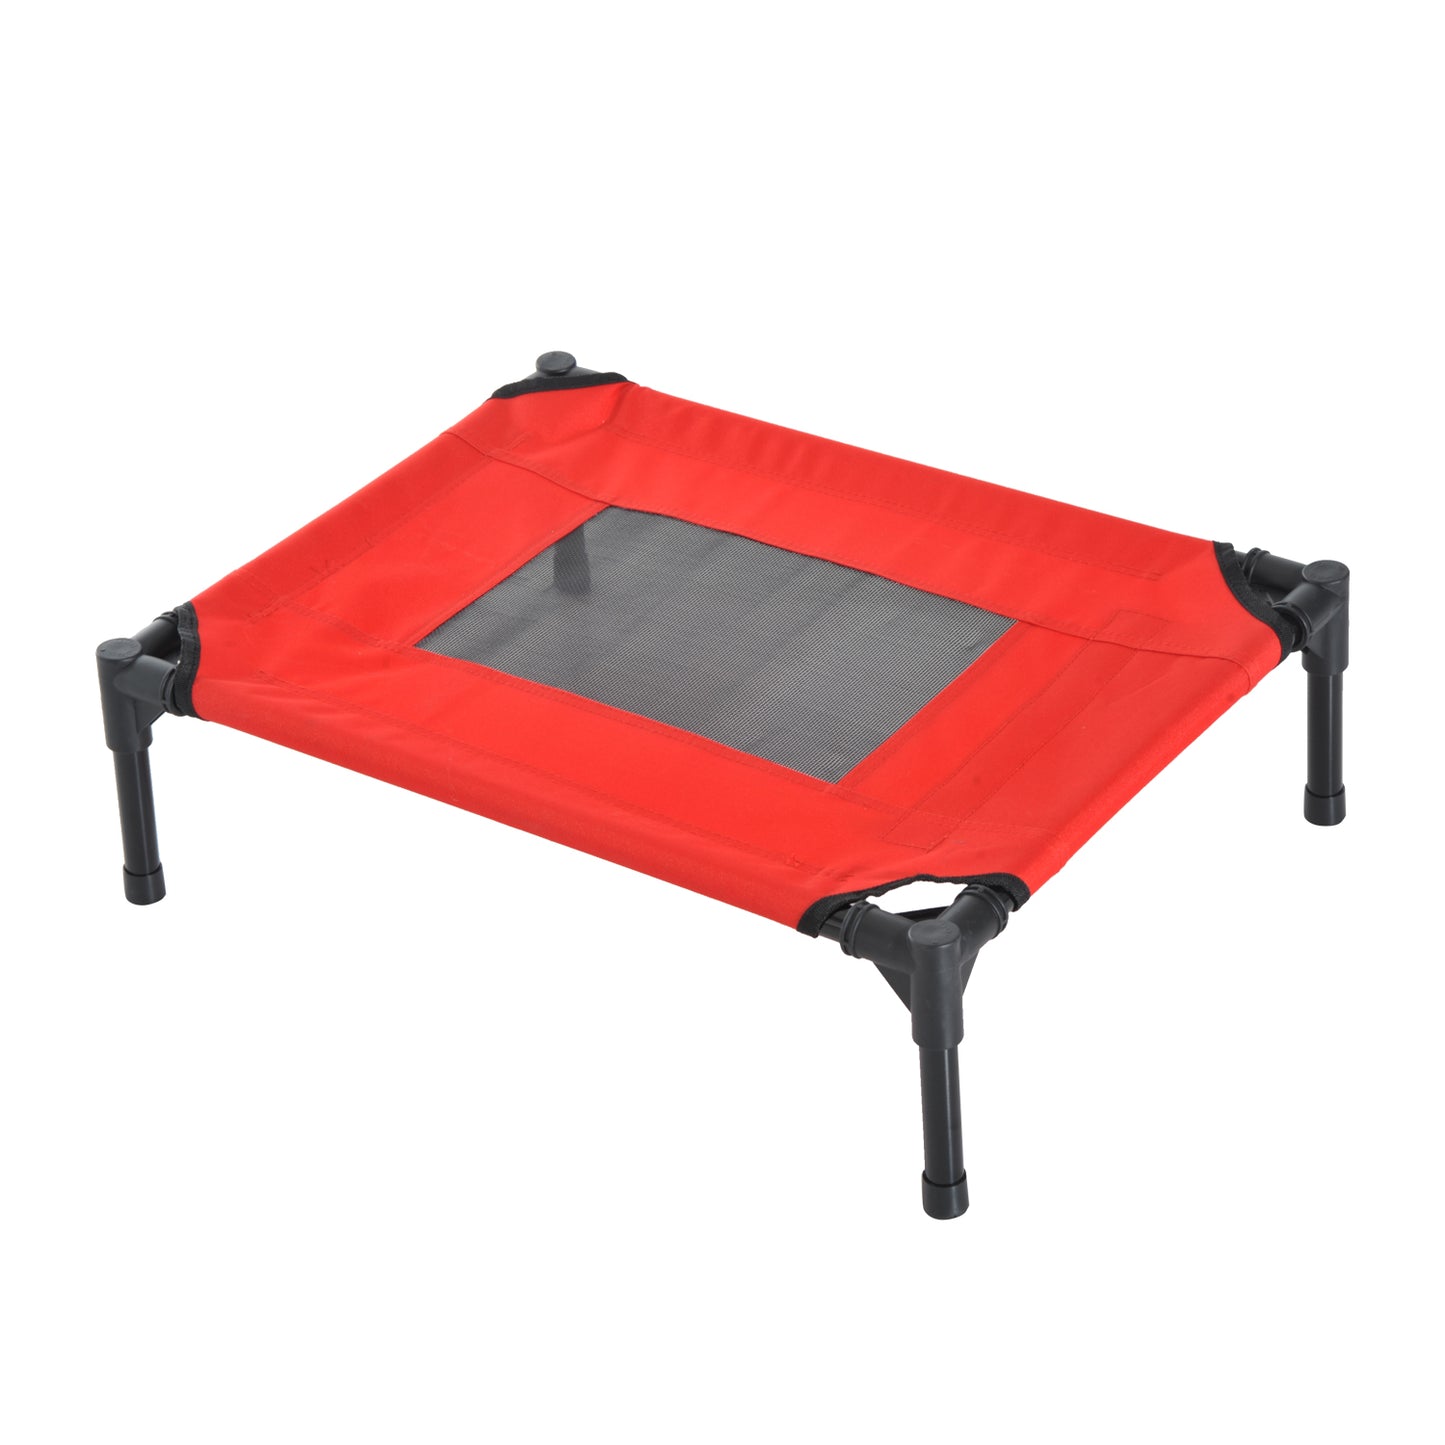 PawHut Elevated Pet Bed Portable Camping Raised Dog Bed w/ Metal Frame Black, Red (Small)